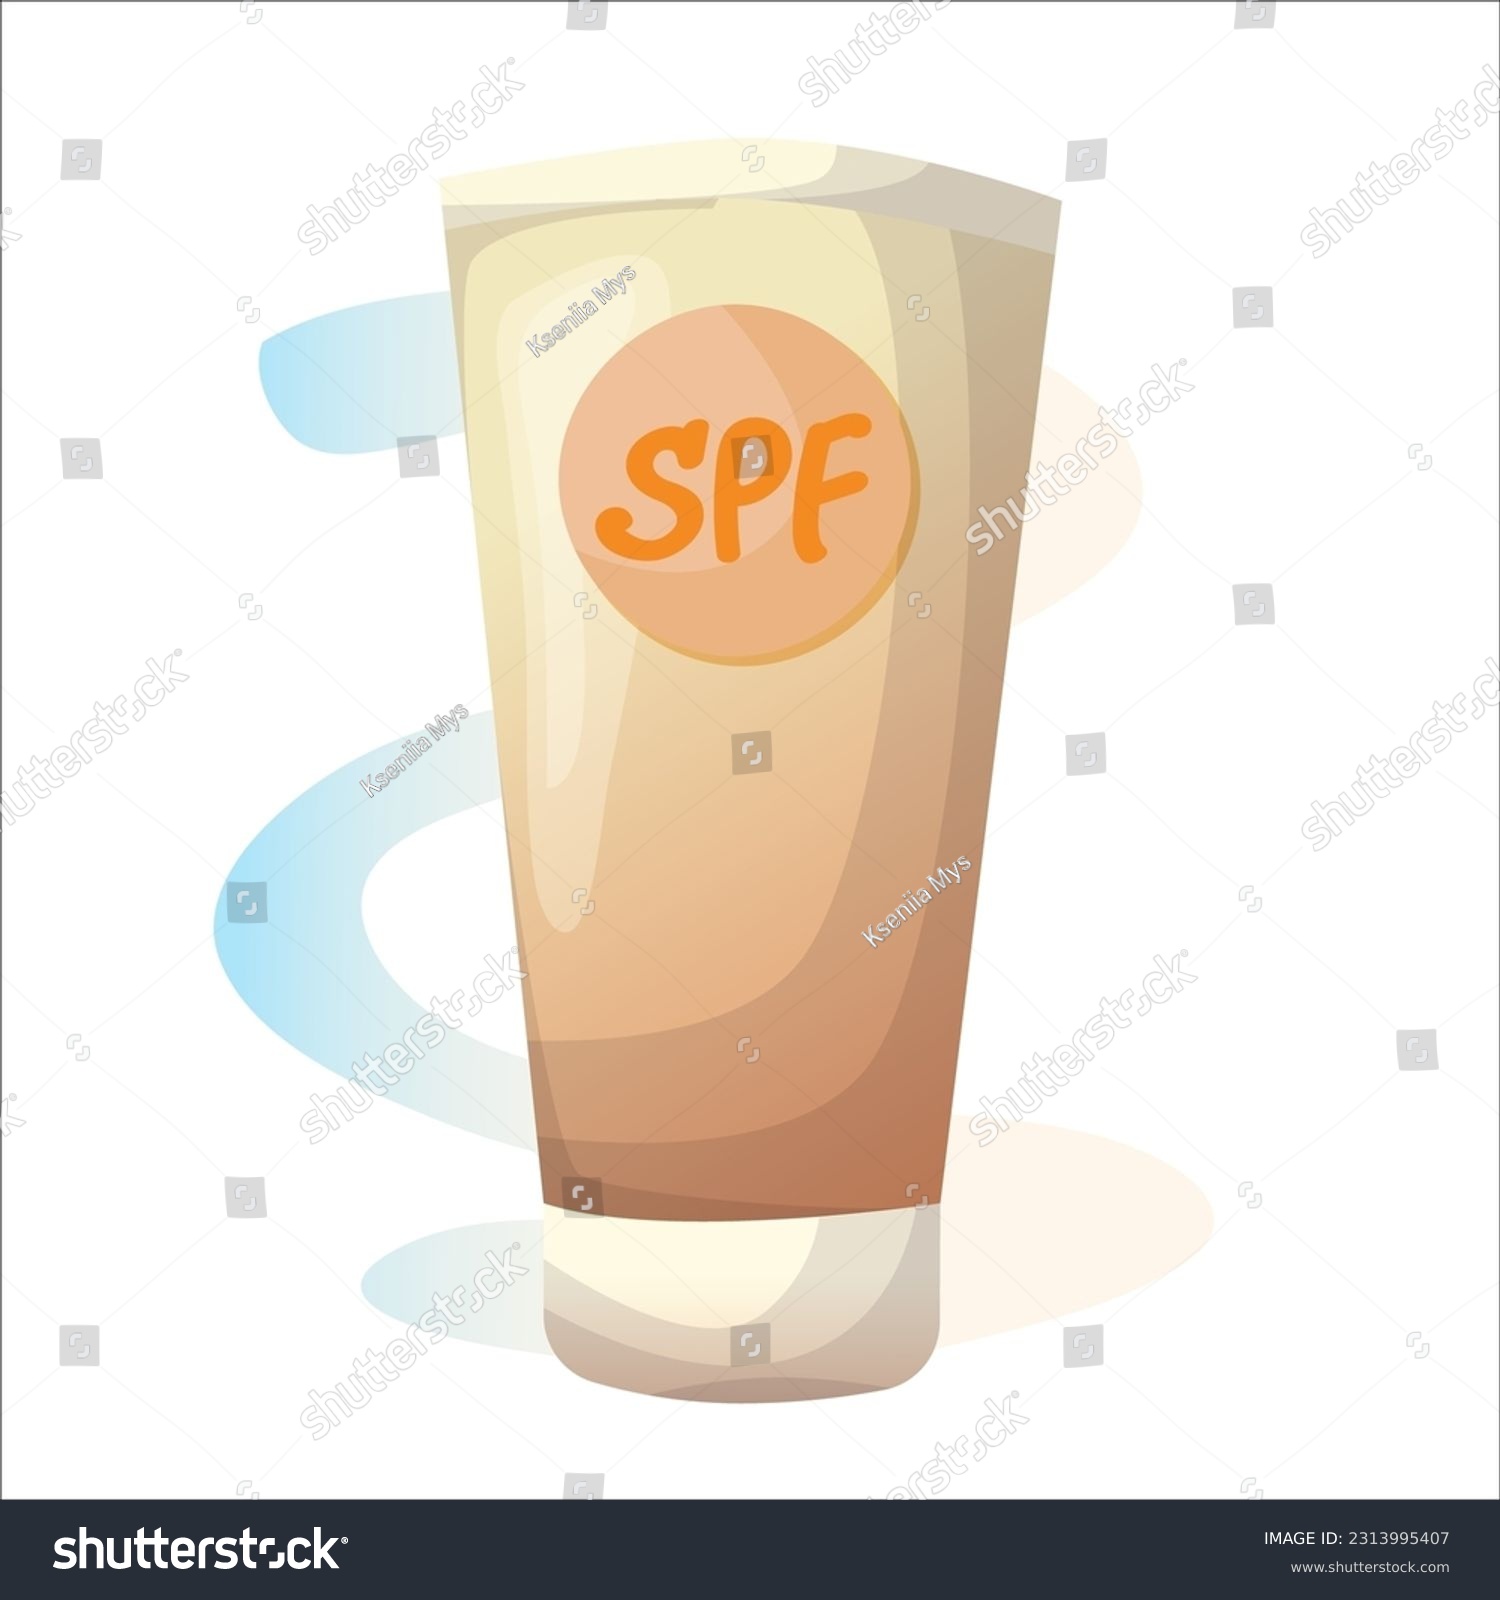 SVG of Illustration of a tube of sunscreen on a white background. cartoon style. spf icon concept isolated . flat cartoon style svg